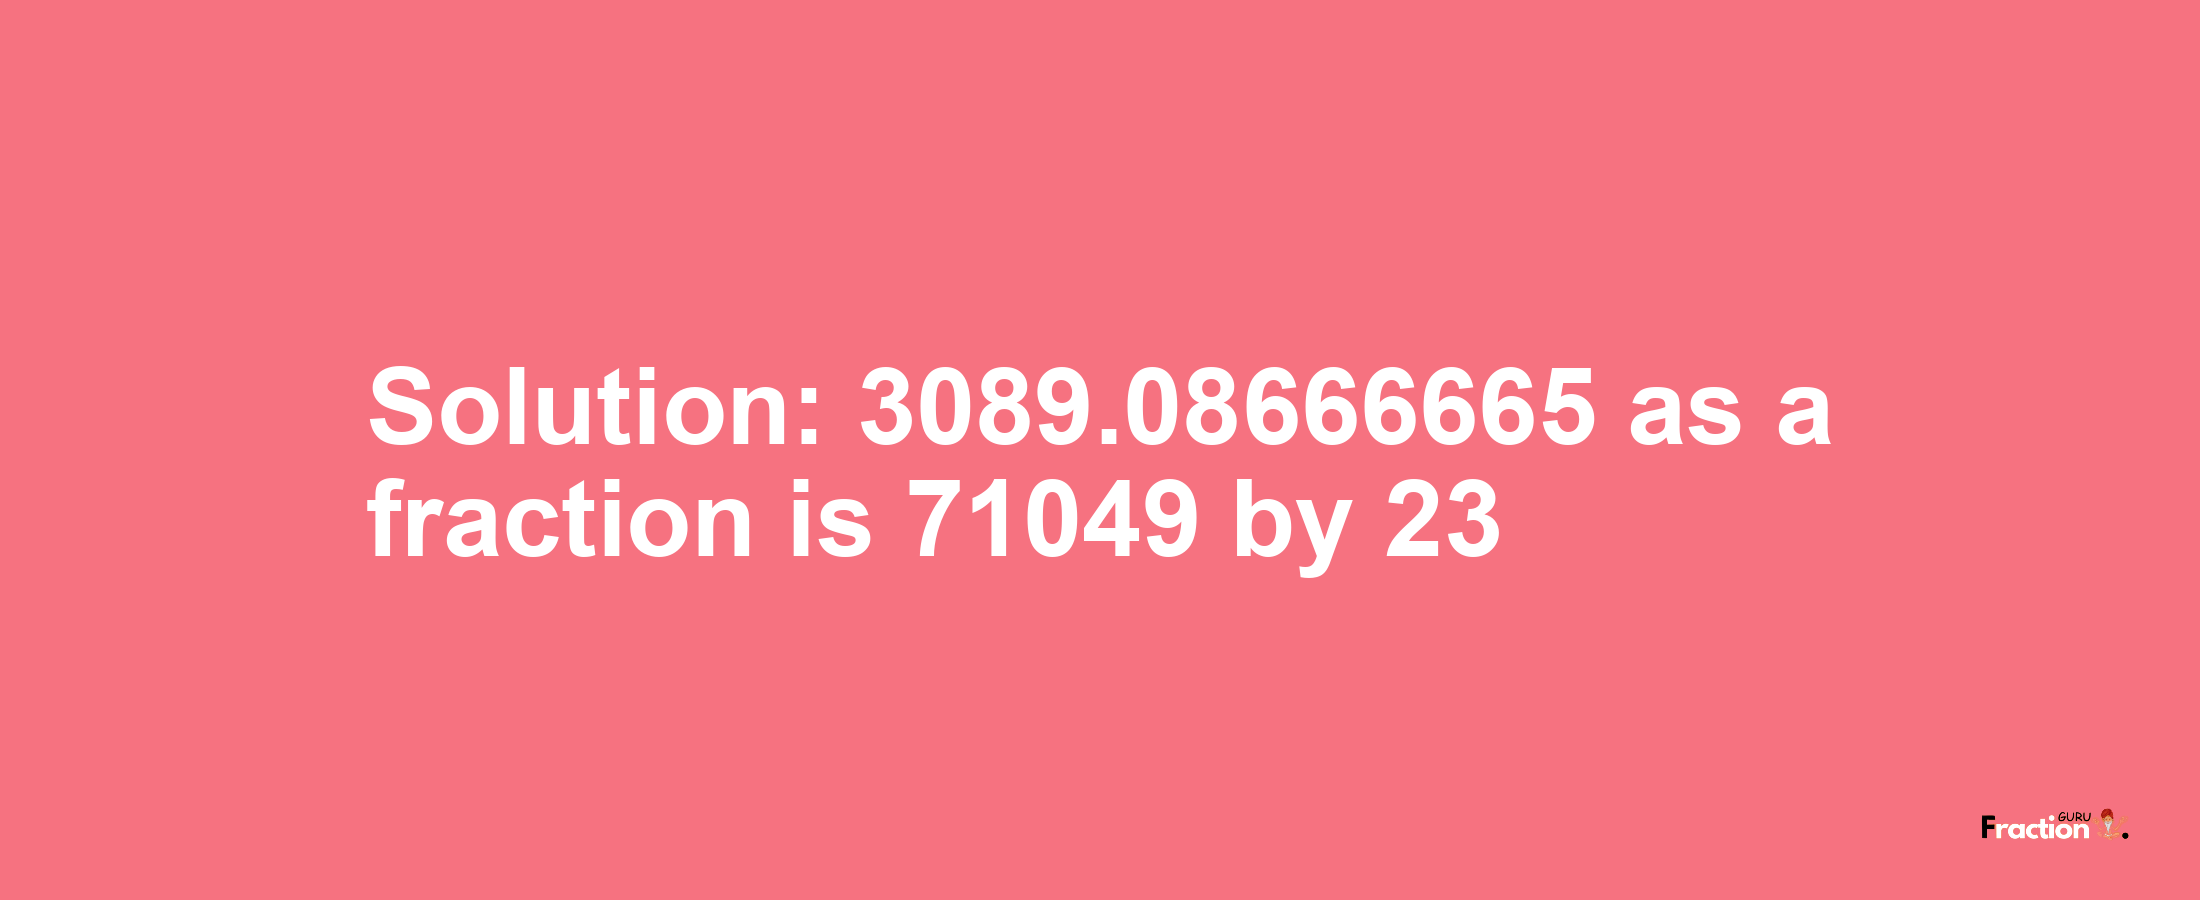 Solution:3089.08666665 as a fraction is 71049/23